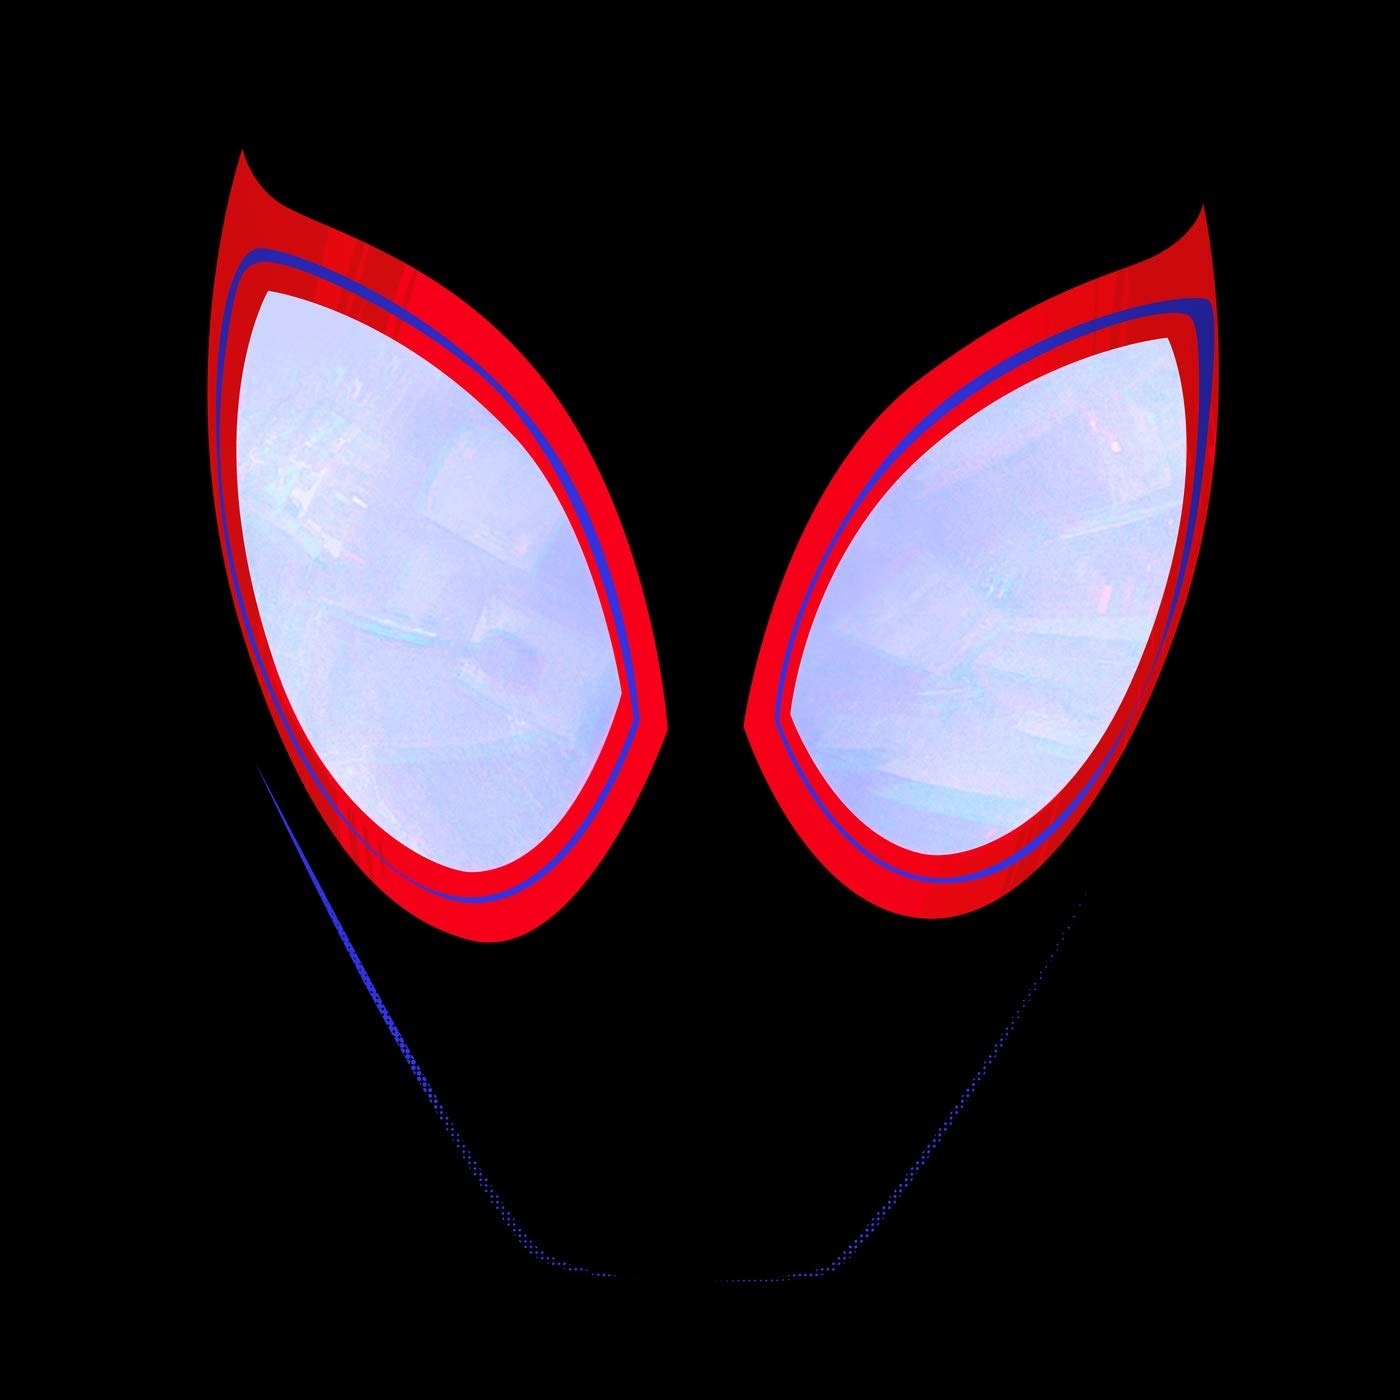 The album cover for Spider-Man Into the Spider-Verse